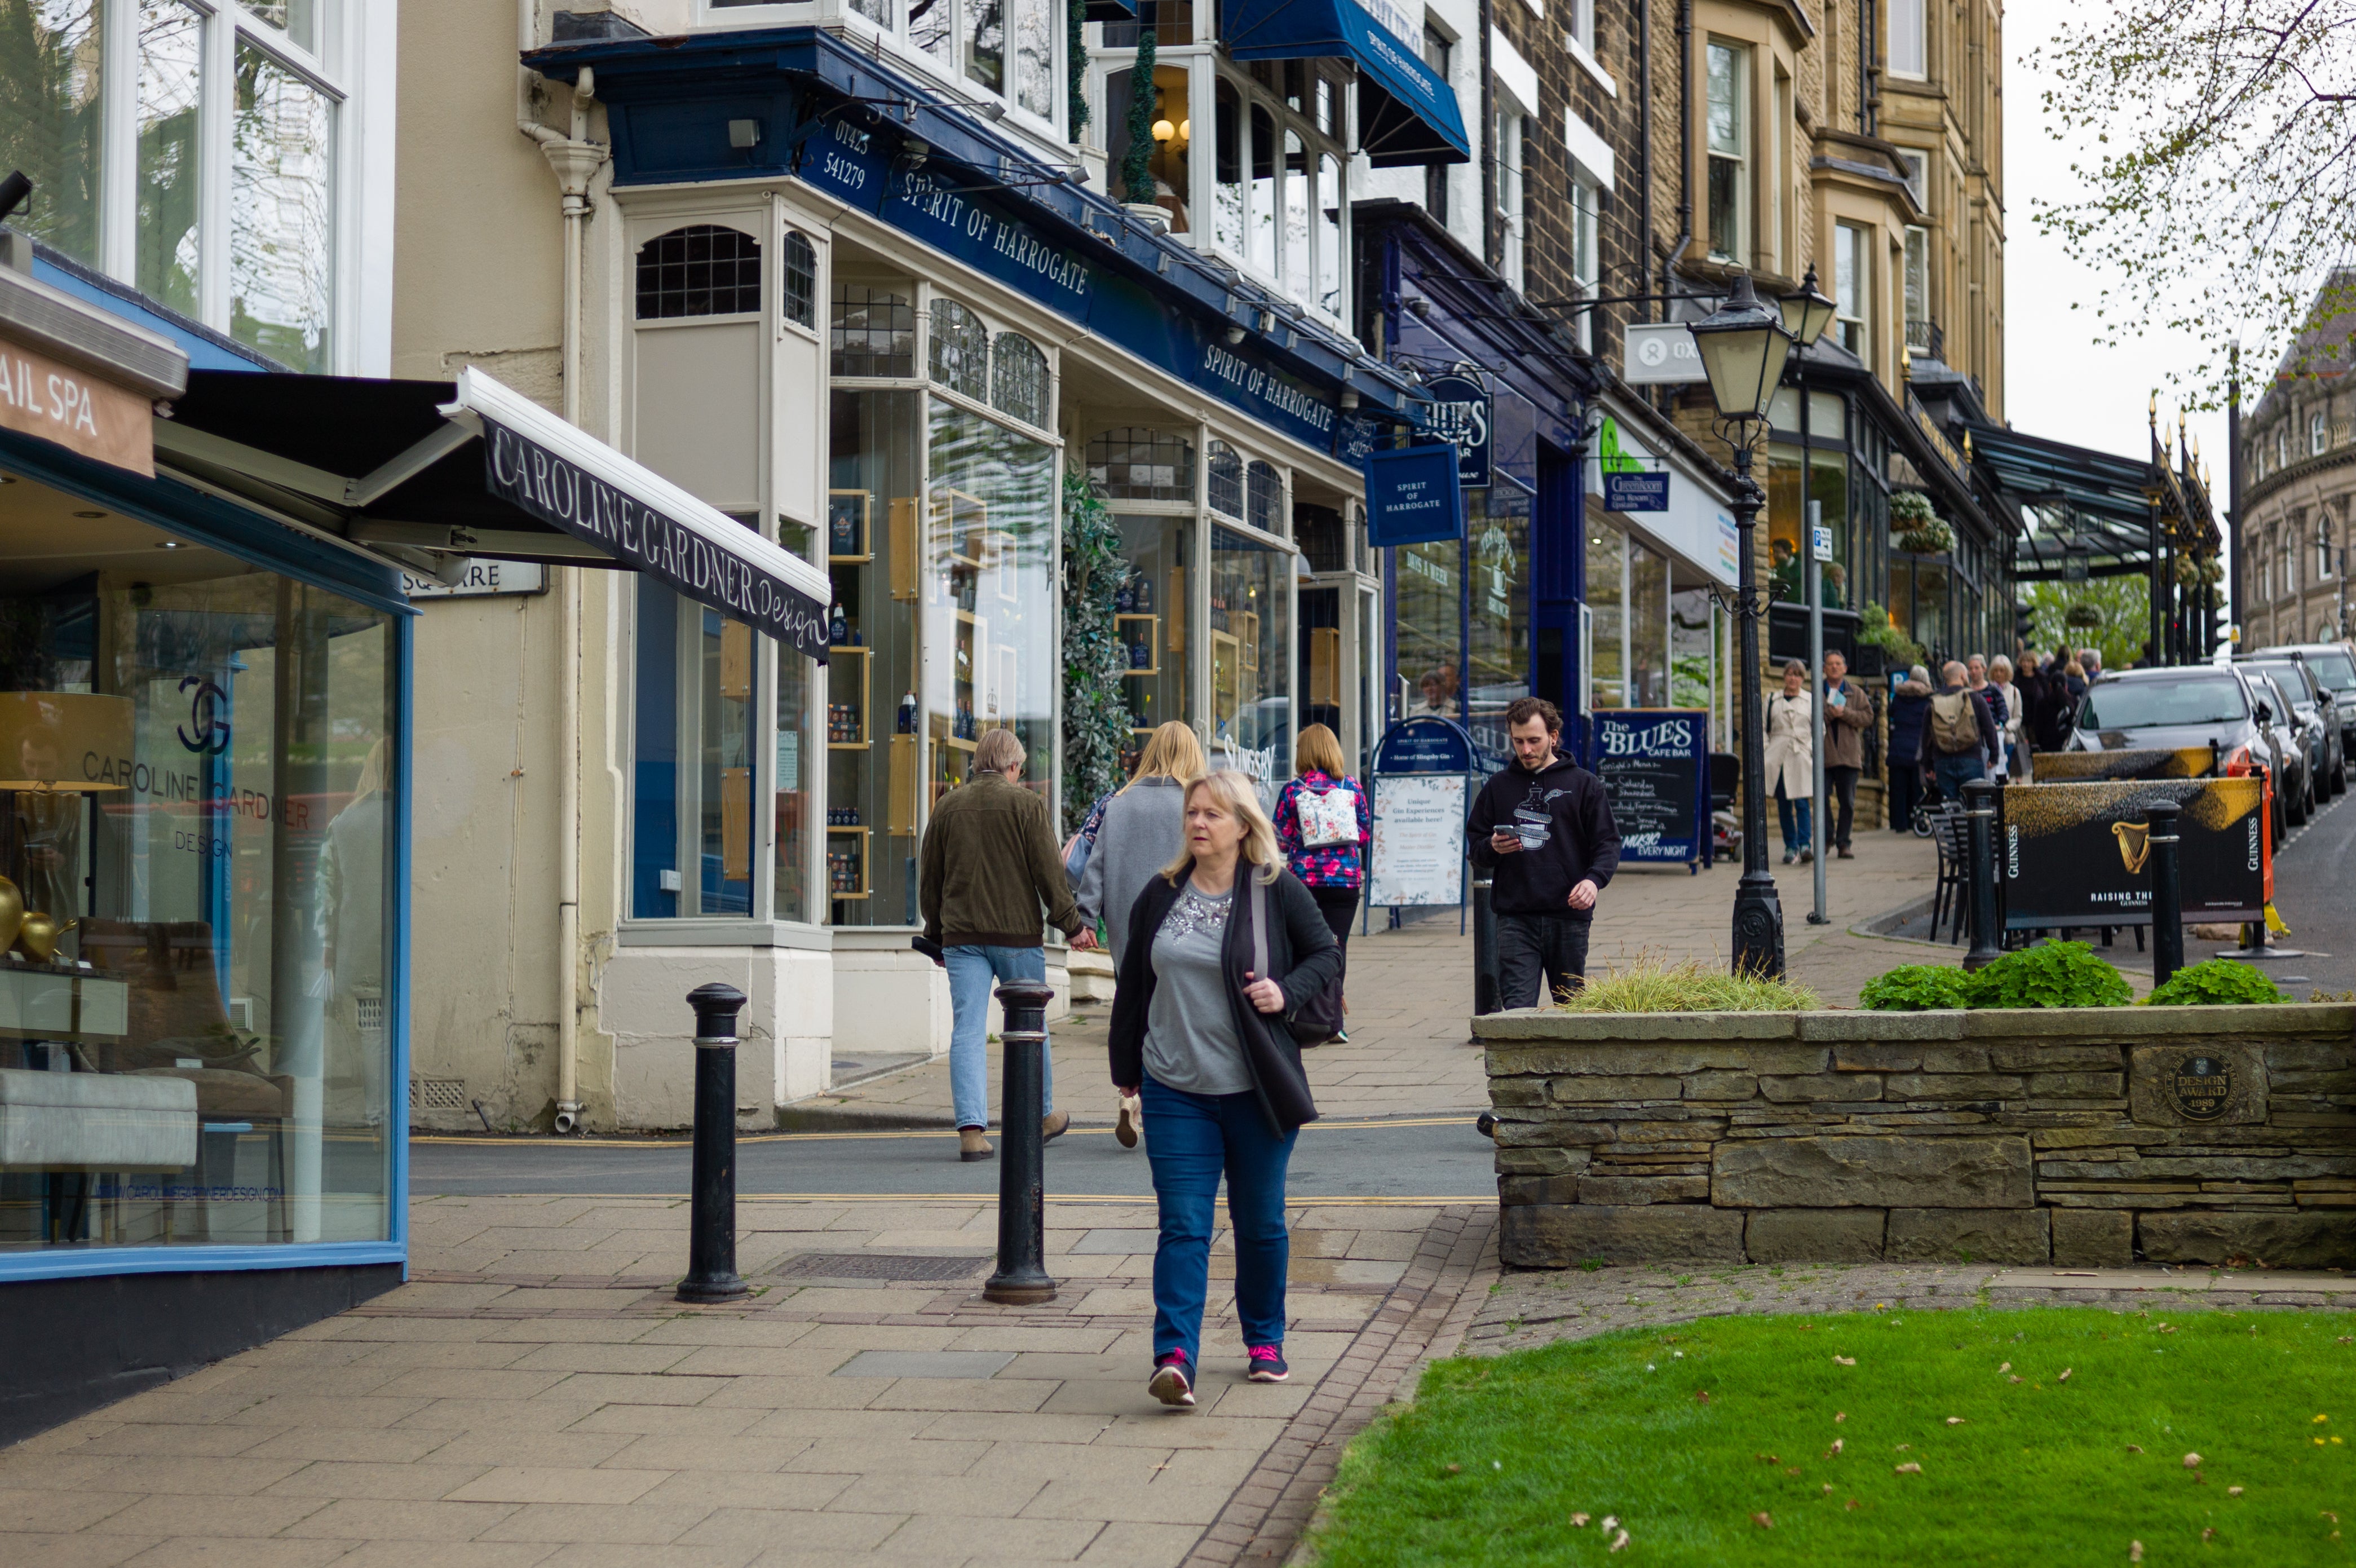 People walk past independent retail shops in the Montpellier Quarter of Harrogate